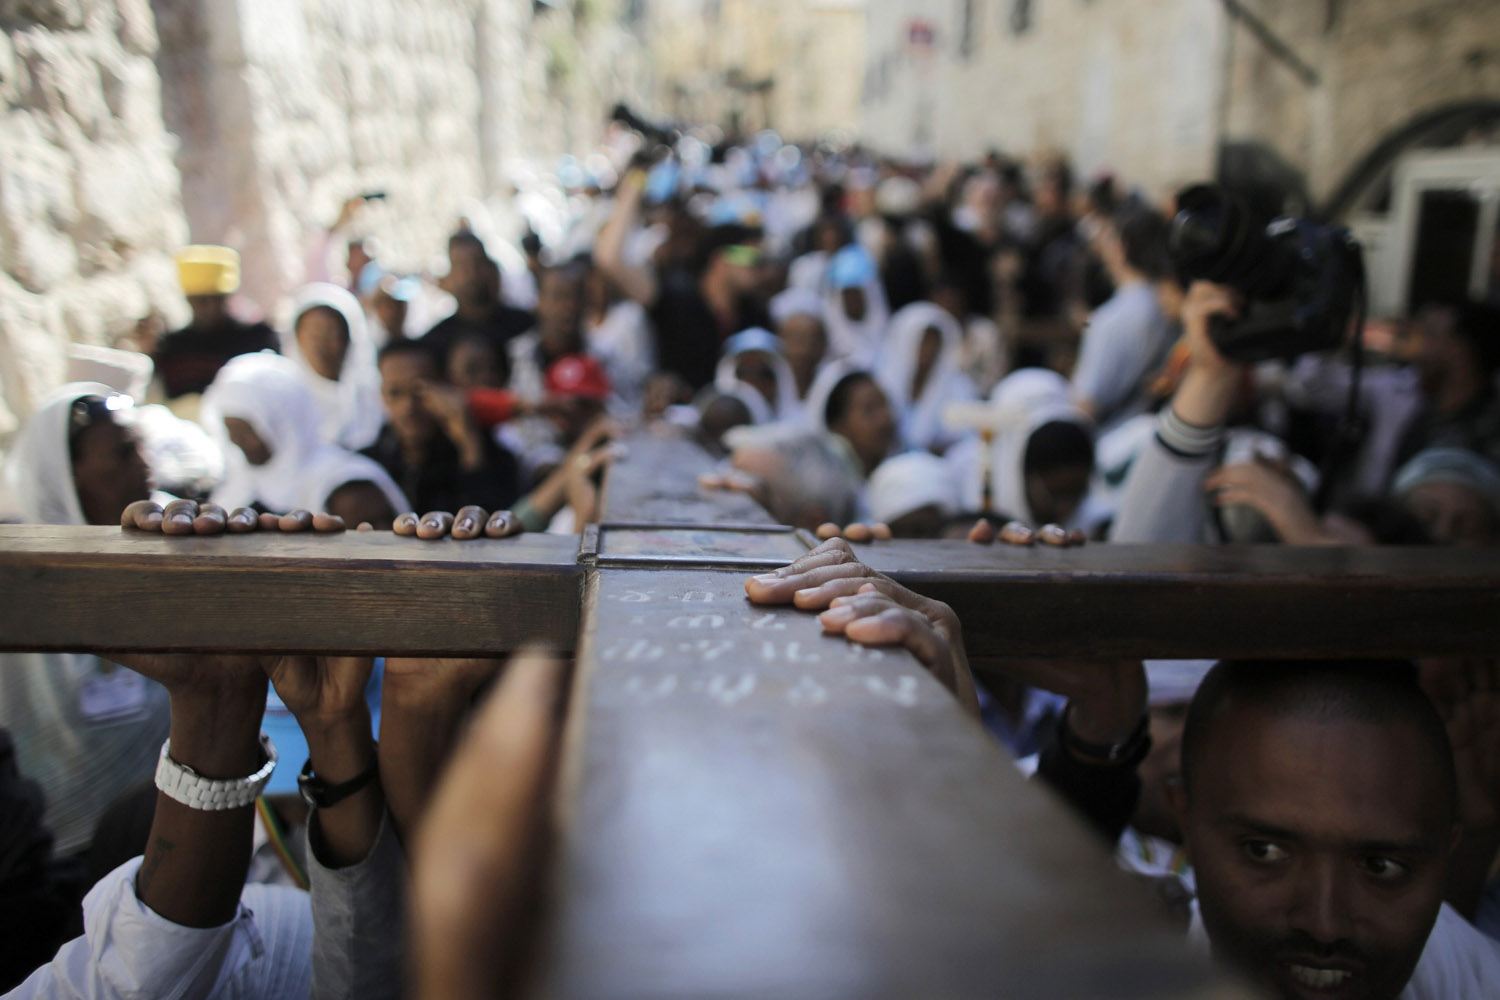 Christian worshippers carry a cross during a procession along the Via Dolorosa on Good Friday in Jerusalem's Old City